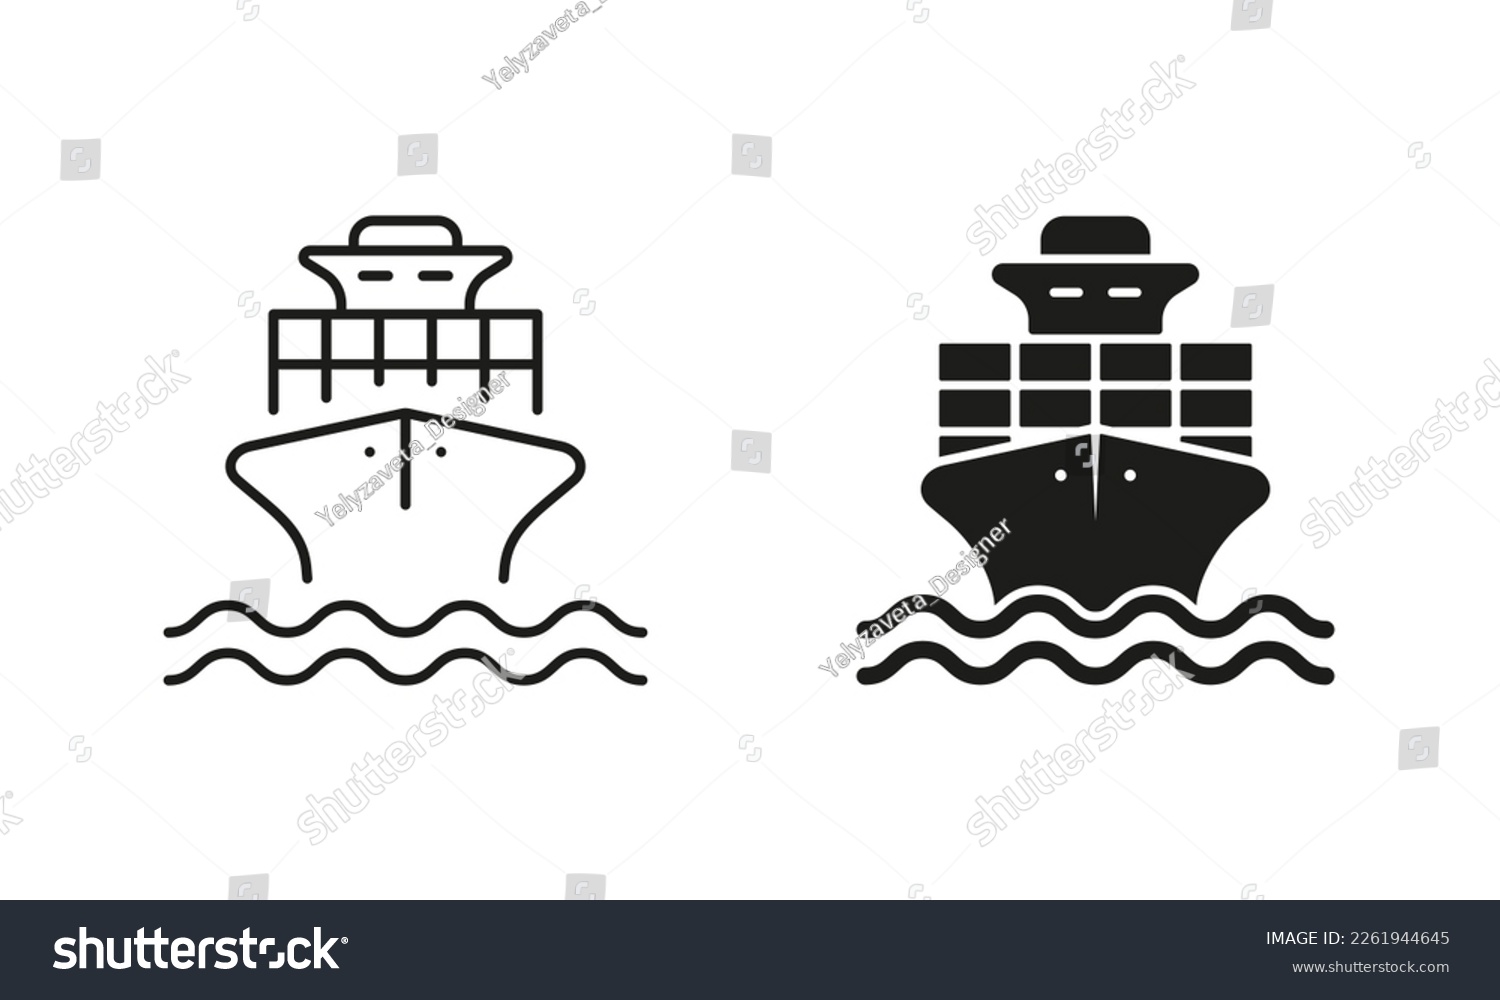 SVG of Sea Boat Vessel Silhouette and Line Icon Set. Freight Marine Container Delivery Pictogram. Cargo Ship Delivery Black Symbol. Big Cruise Yacht Shipping. Editable Stroke. Isolated Vector Illustration. svg